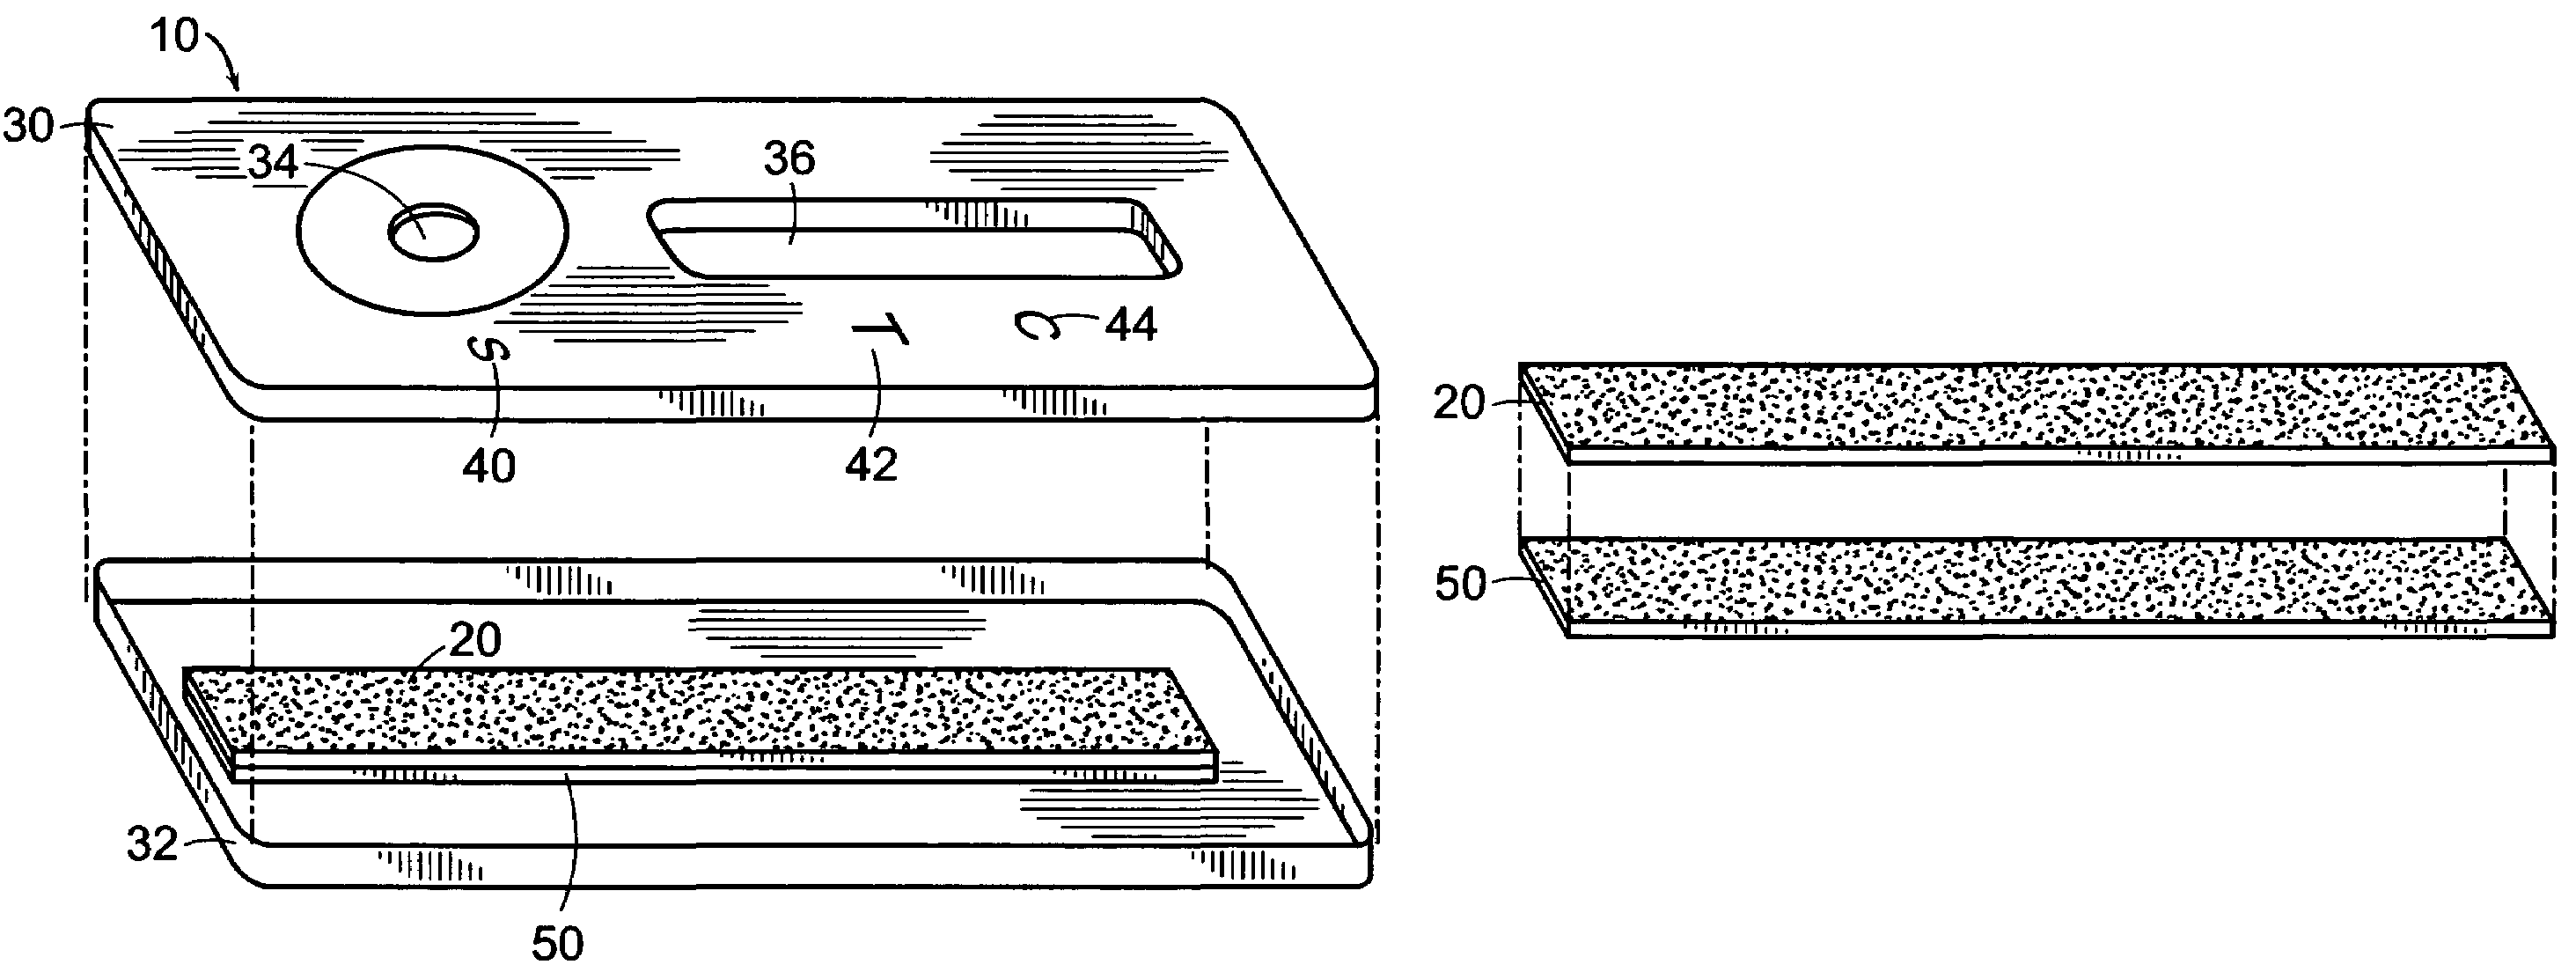 Lateral flow format, materials and methods